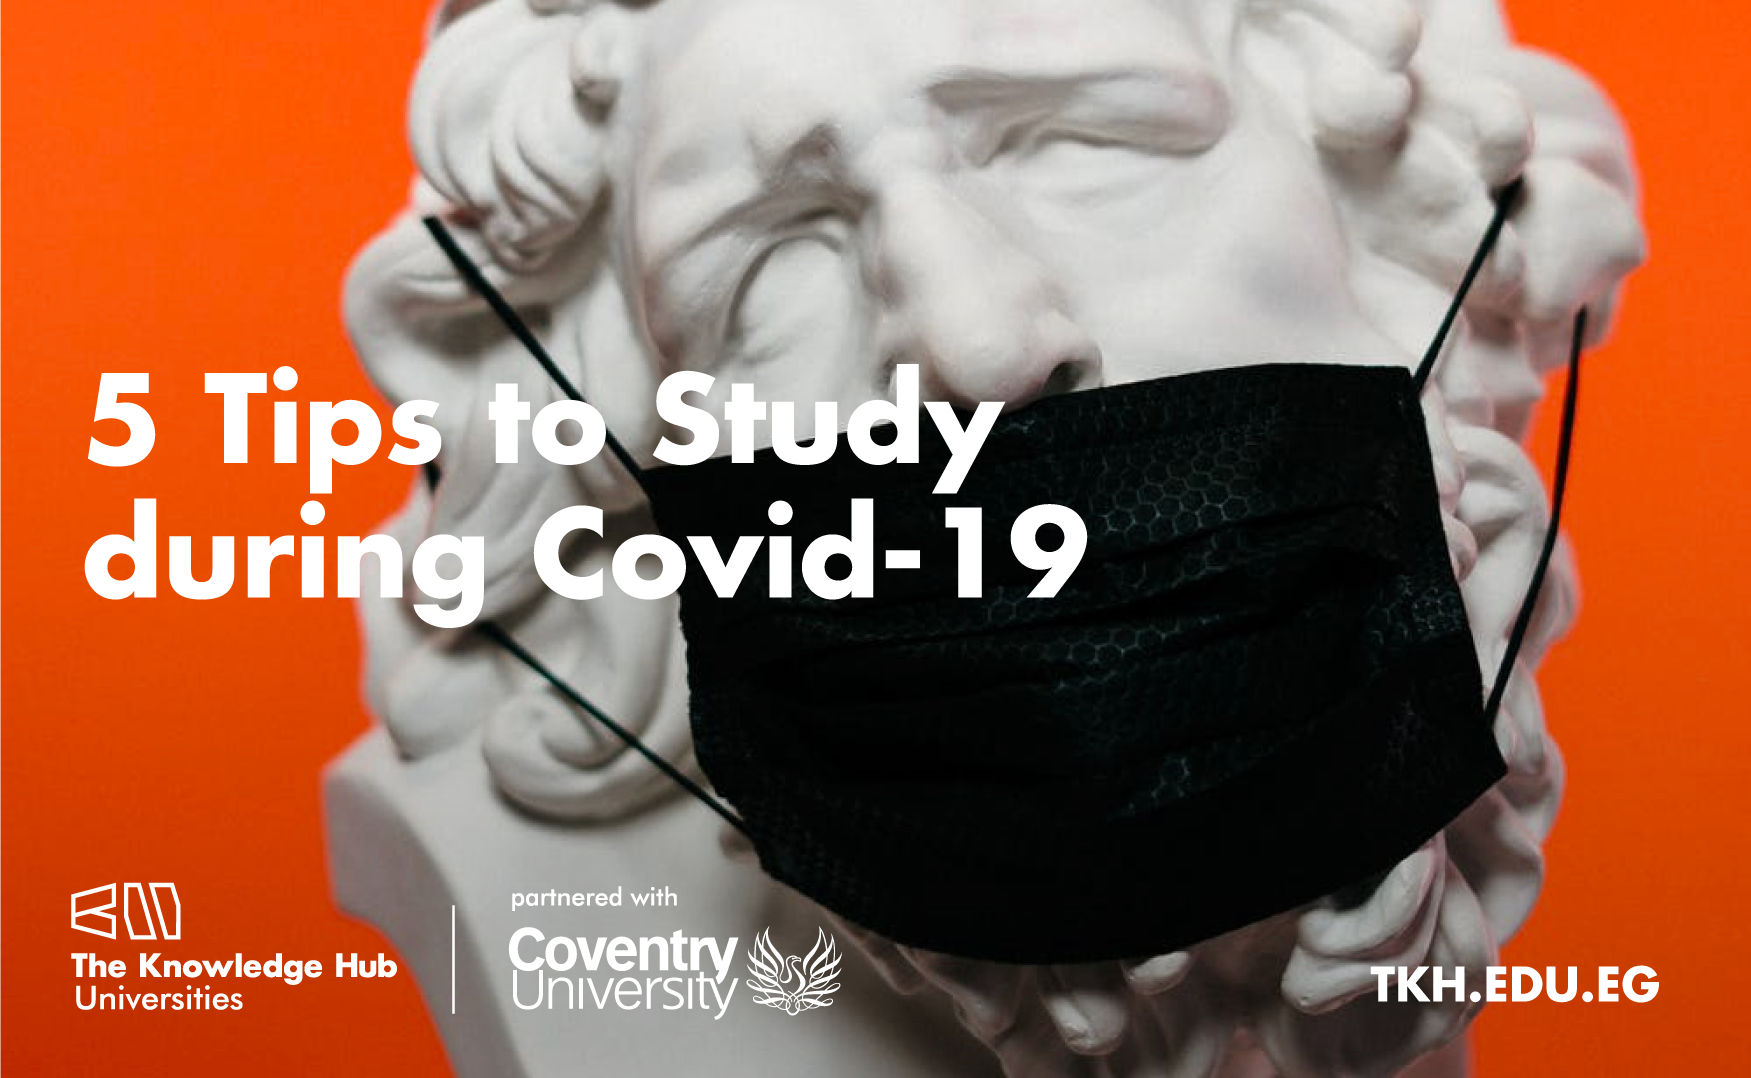 5 Tips to study during Covid-19